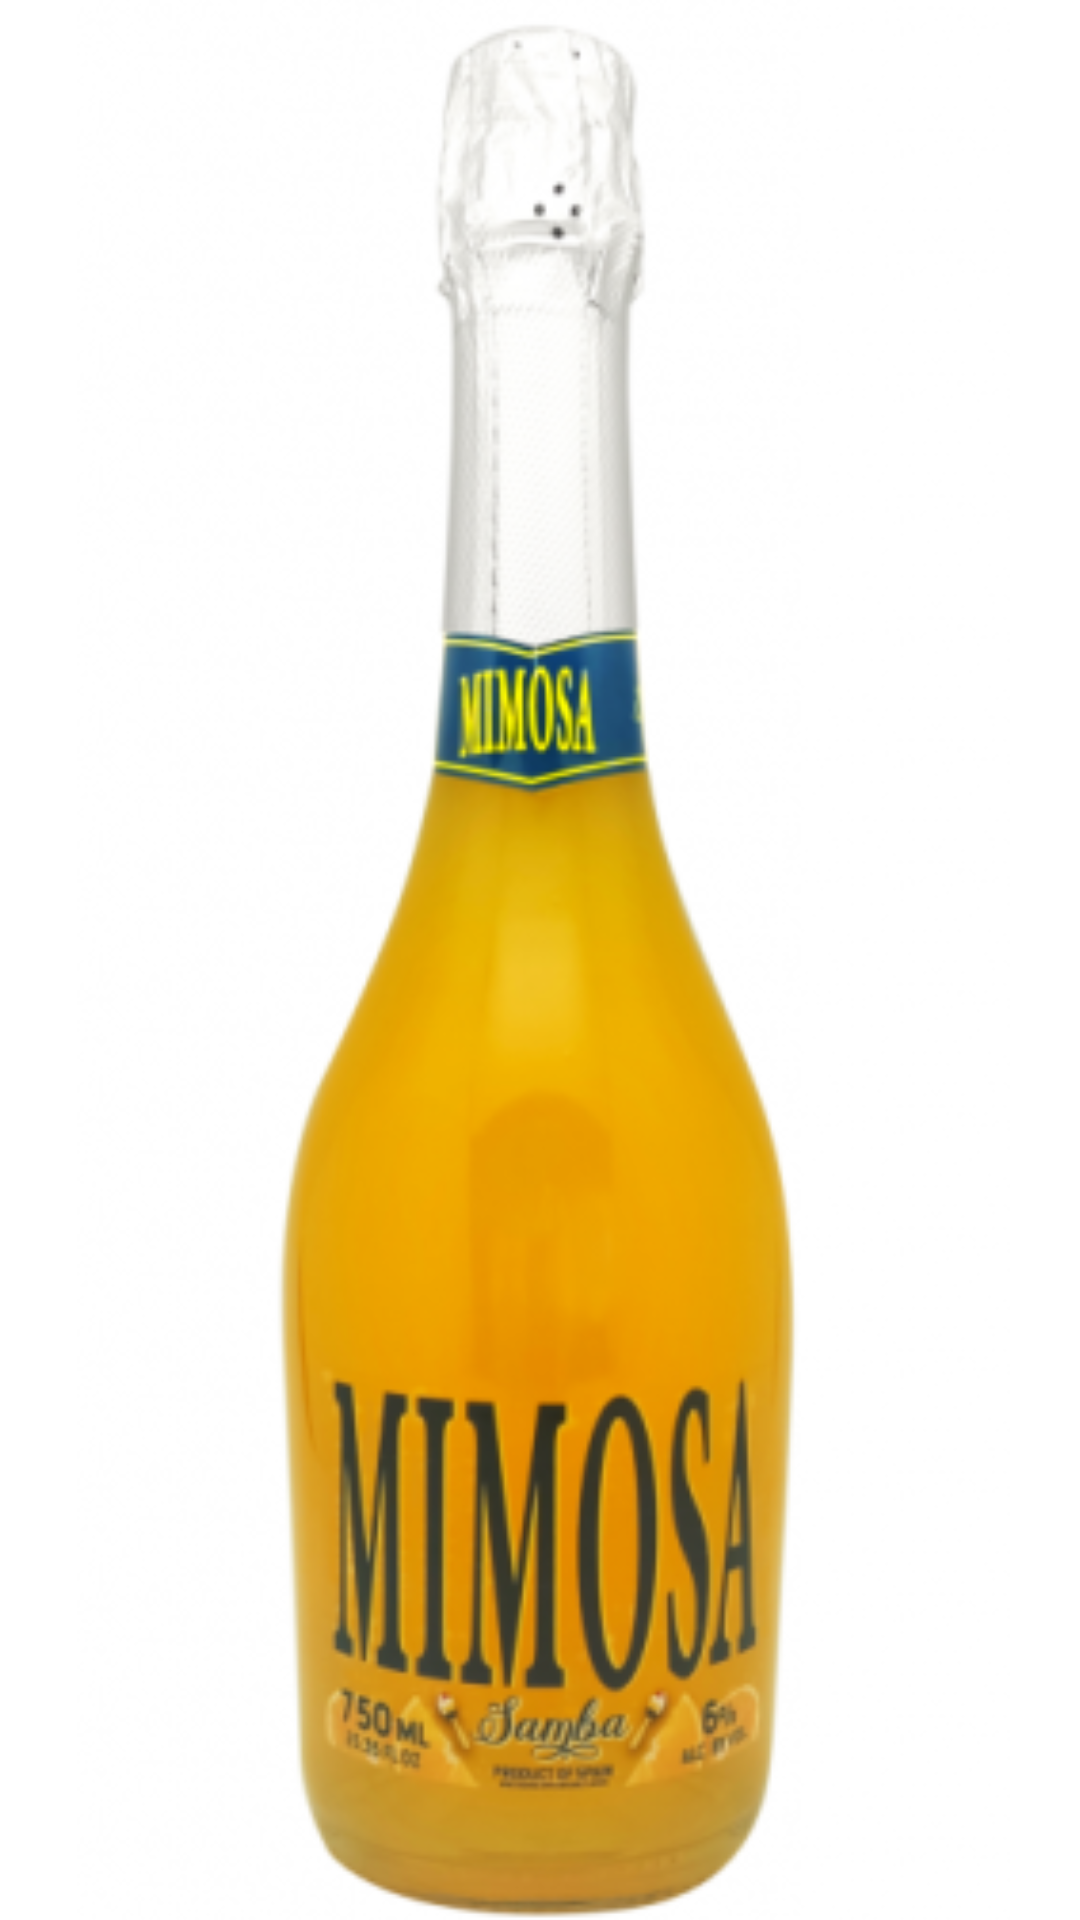 Samba Mimosa from Spain - Winner of Silver medal at the USA Wine 